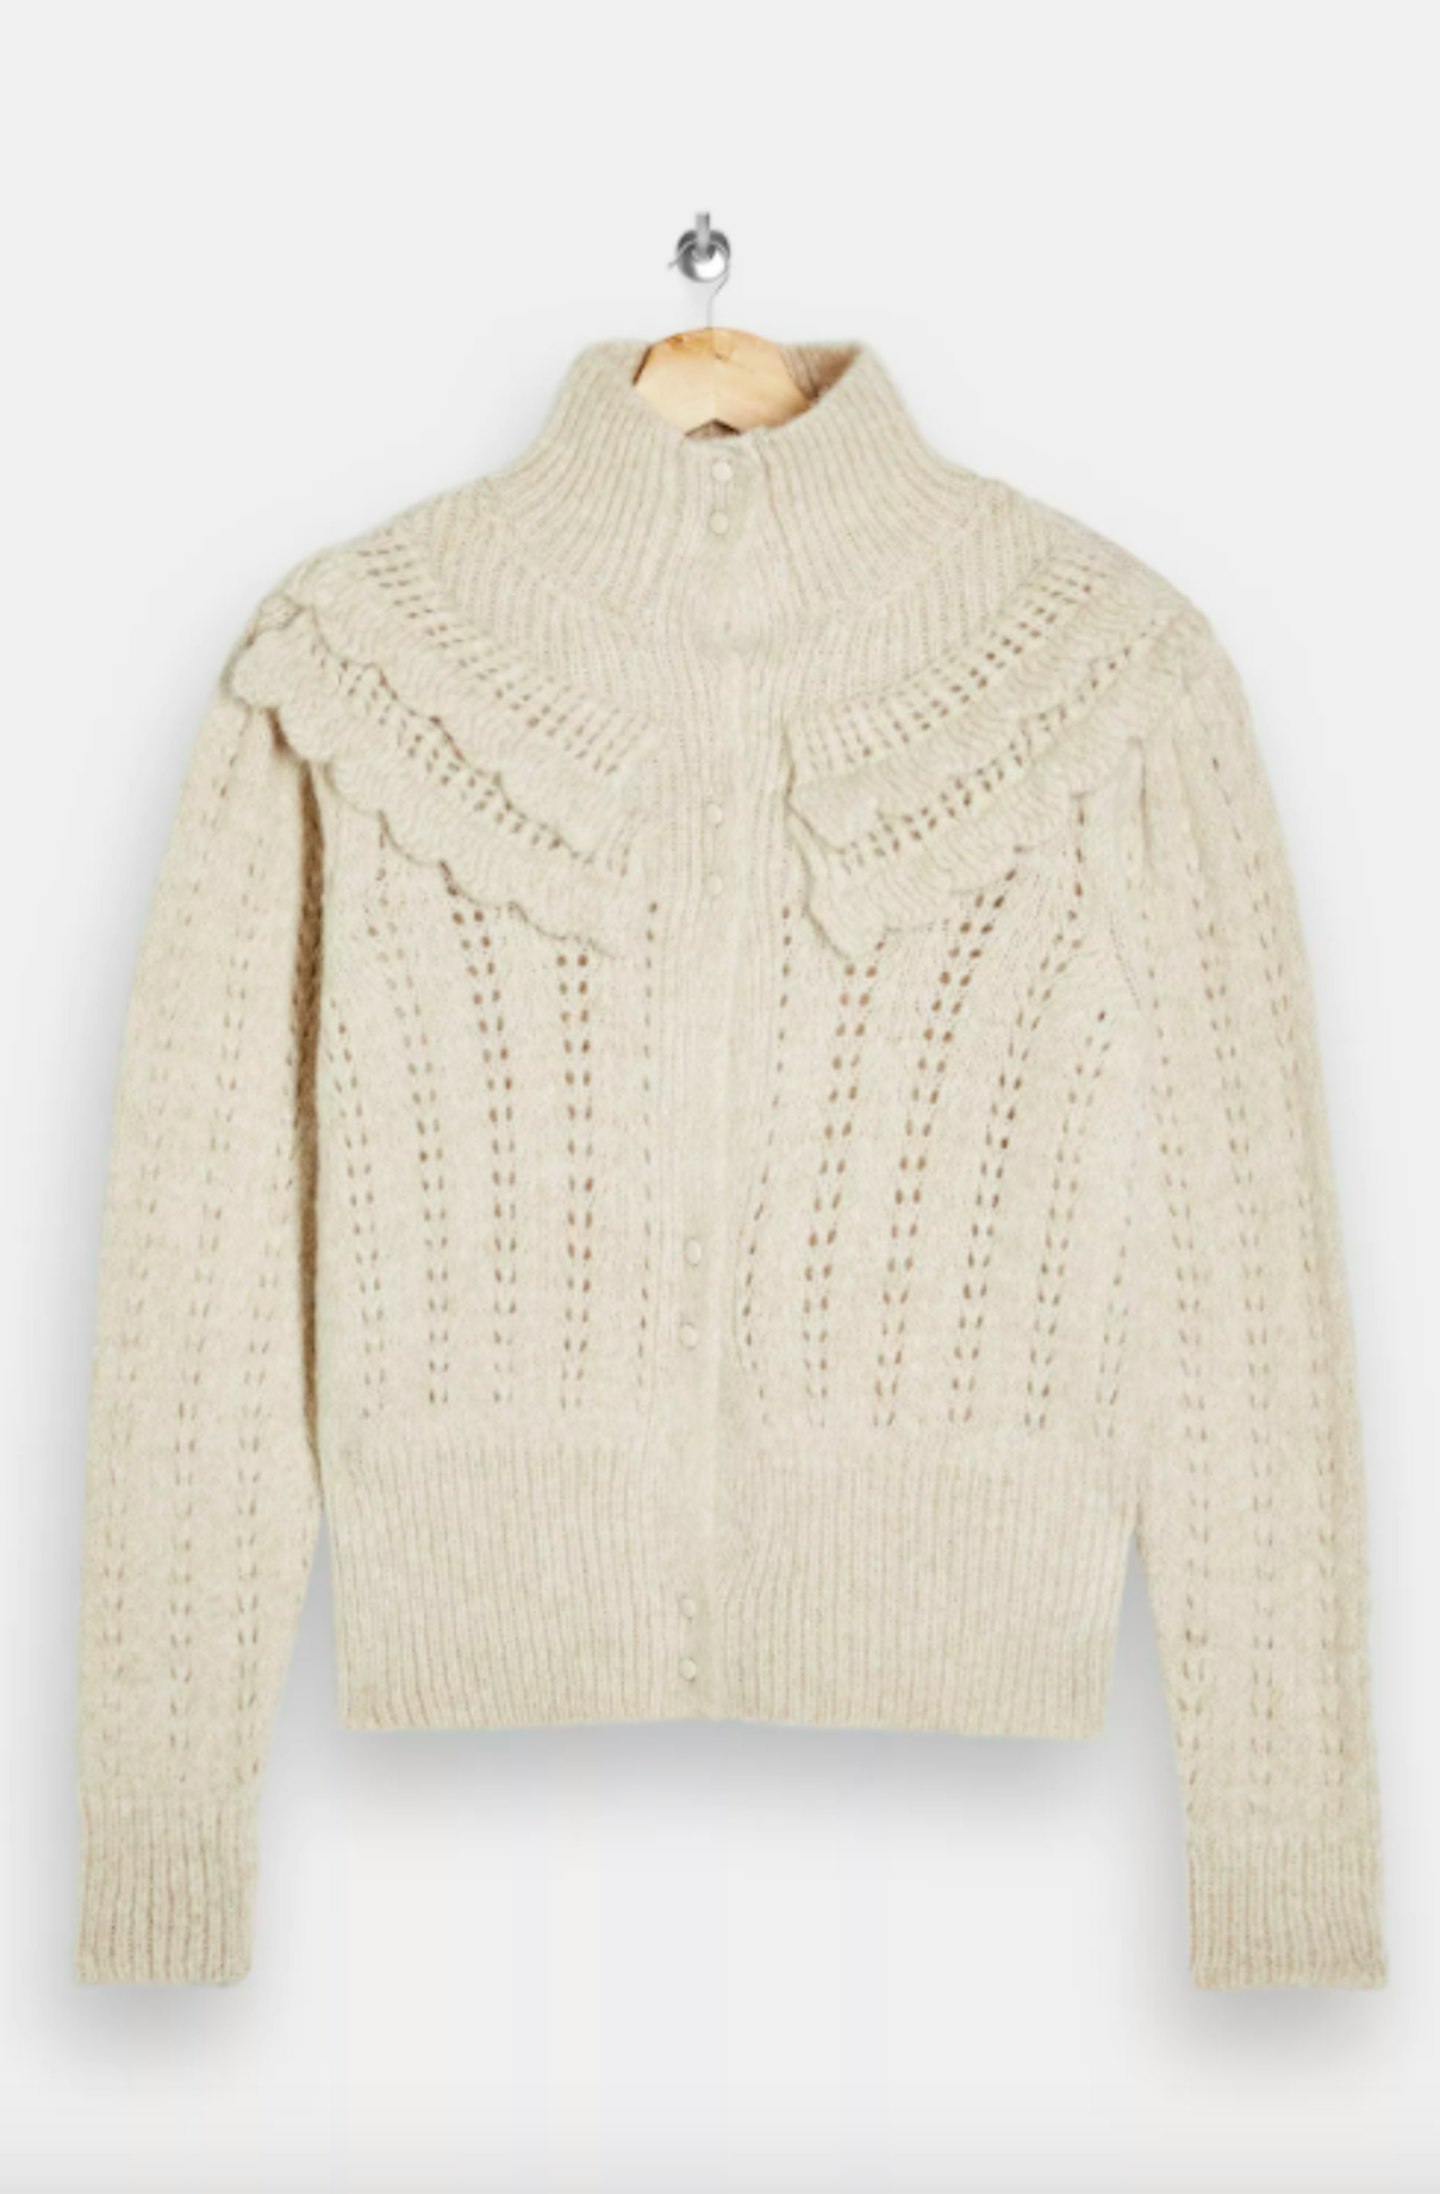 Topshop, Ivory High-Neck Frill Knitted Cardigan, £35.99